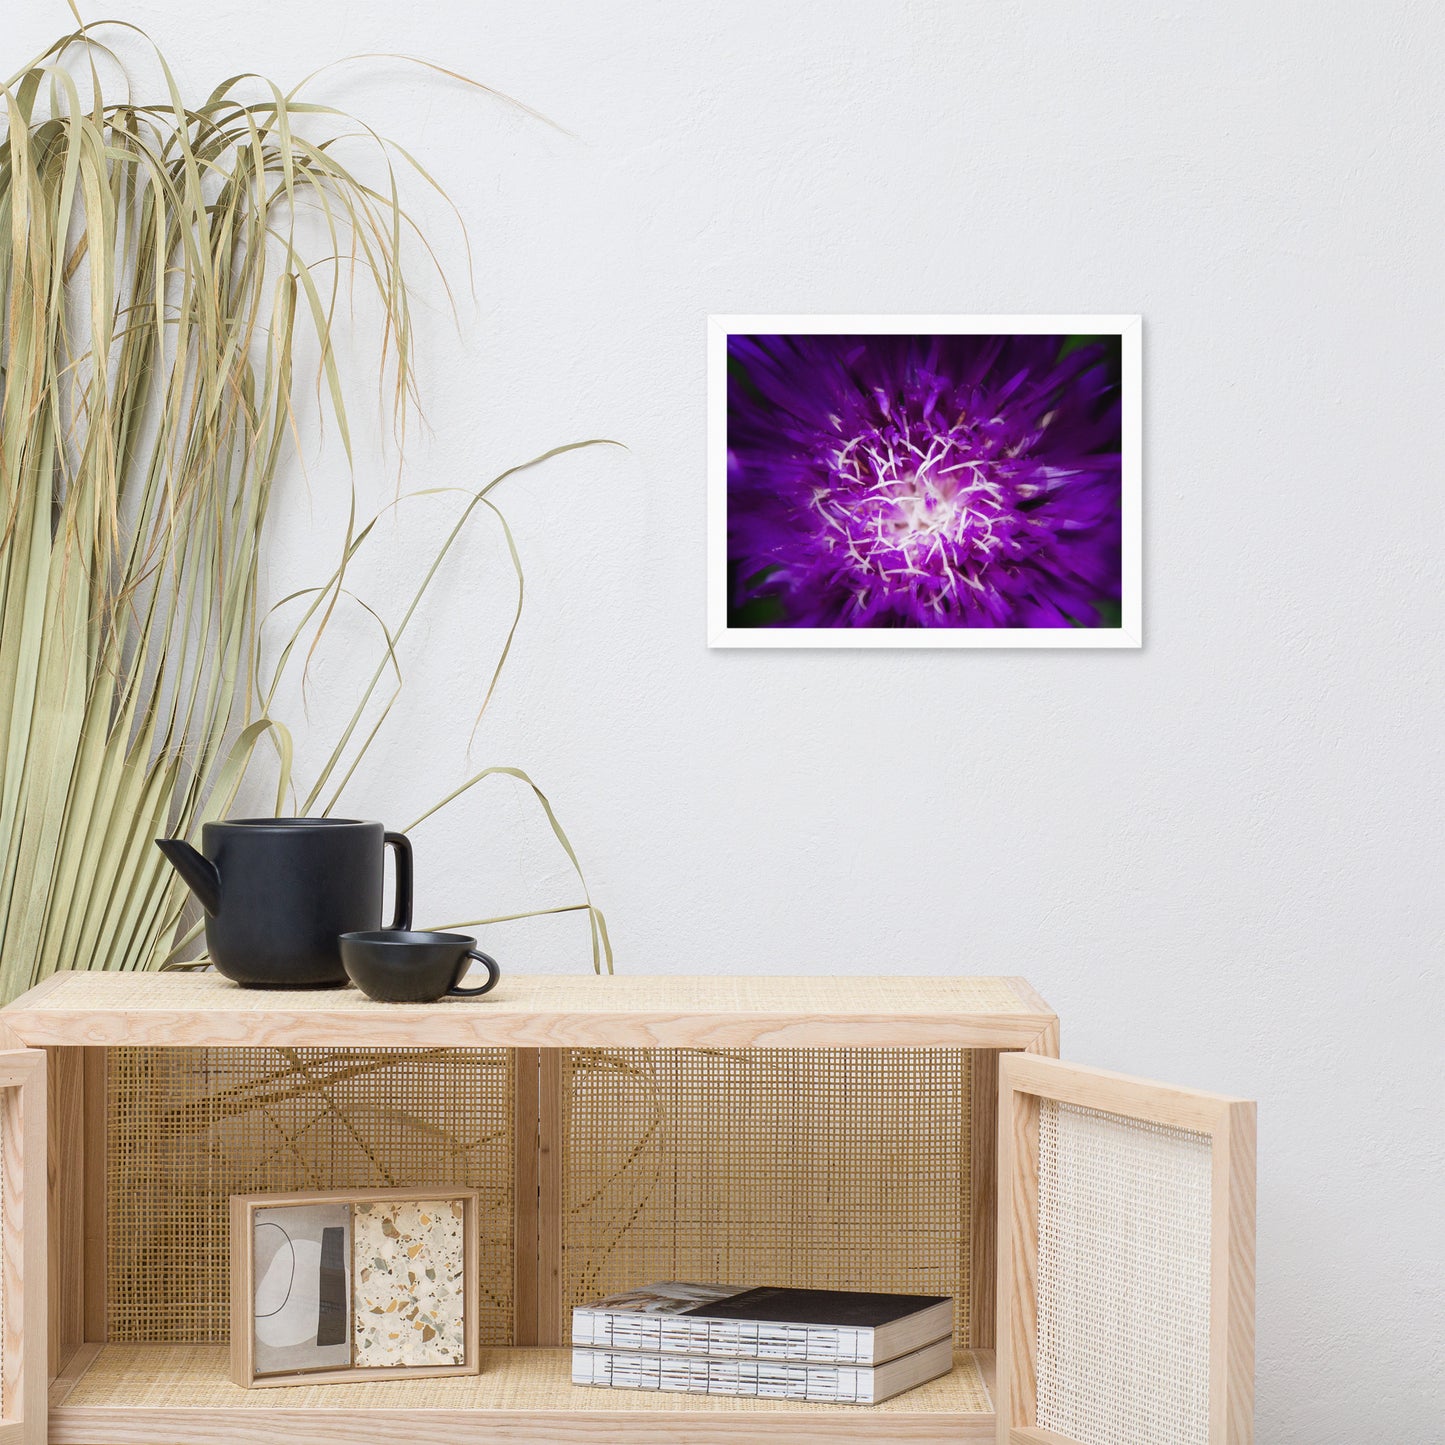 Modern Wall Hangings For Living Room: Purple Abstract Flower - Botanical / Floral / Flora / Flowers / Nature Photograph Framed Wall Art Print - Artwork - Wall Decor